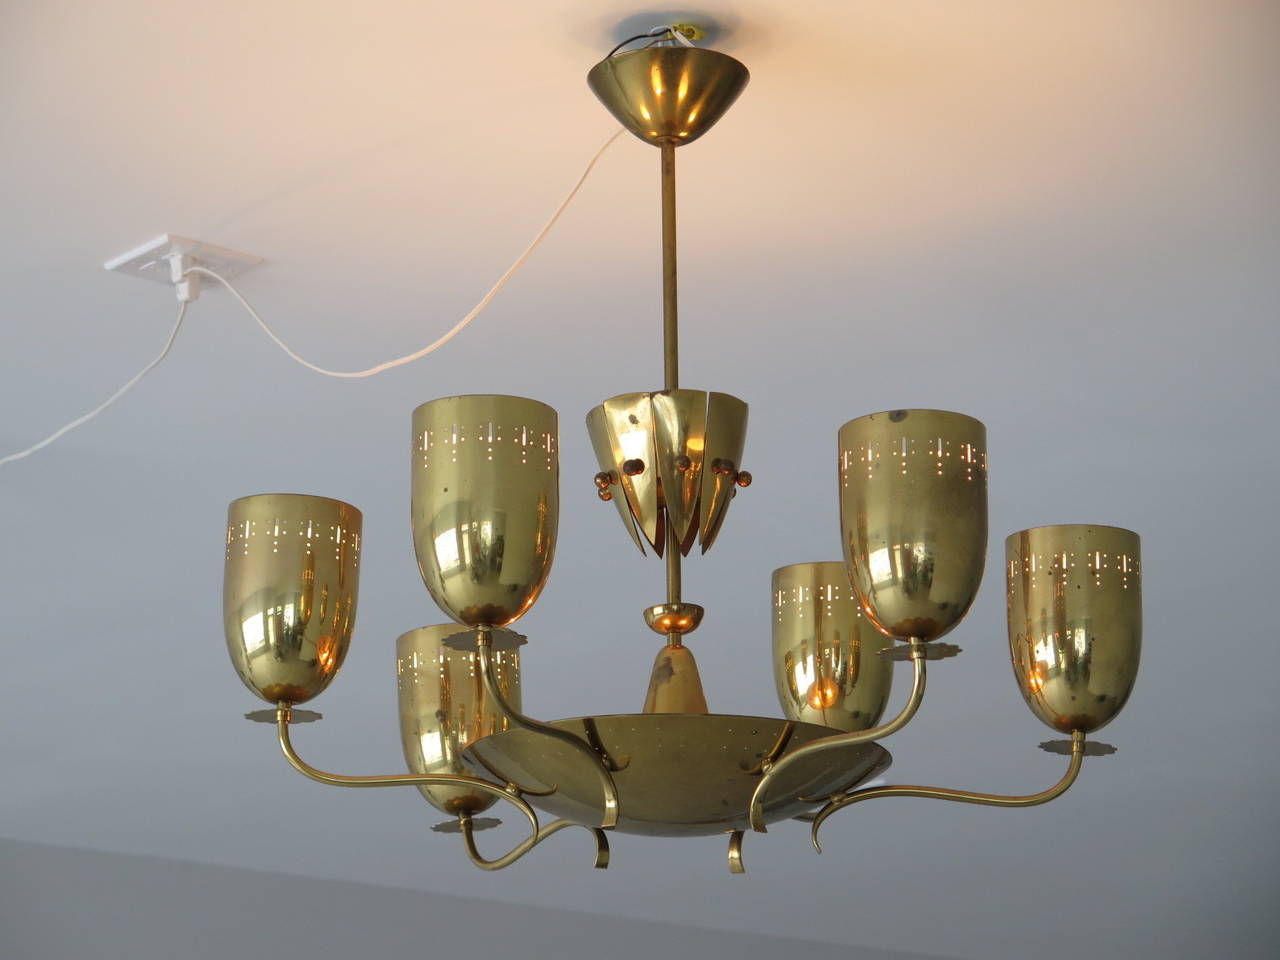 A large and highly stylized German chandelier from the 1950s, in polished brass. Six arms with decorations and lighted central dish with perforations.